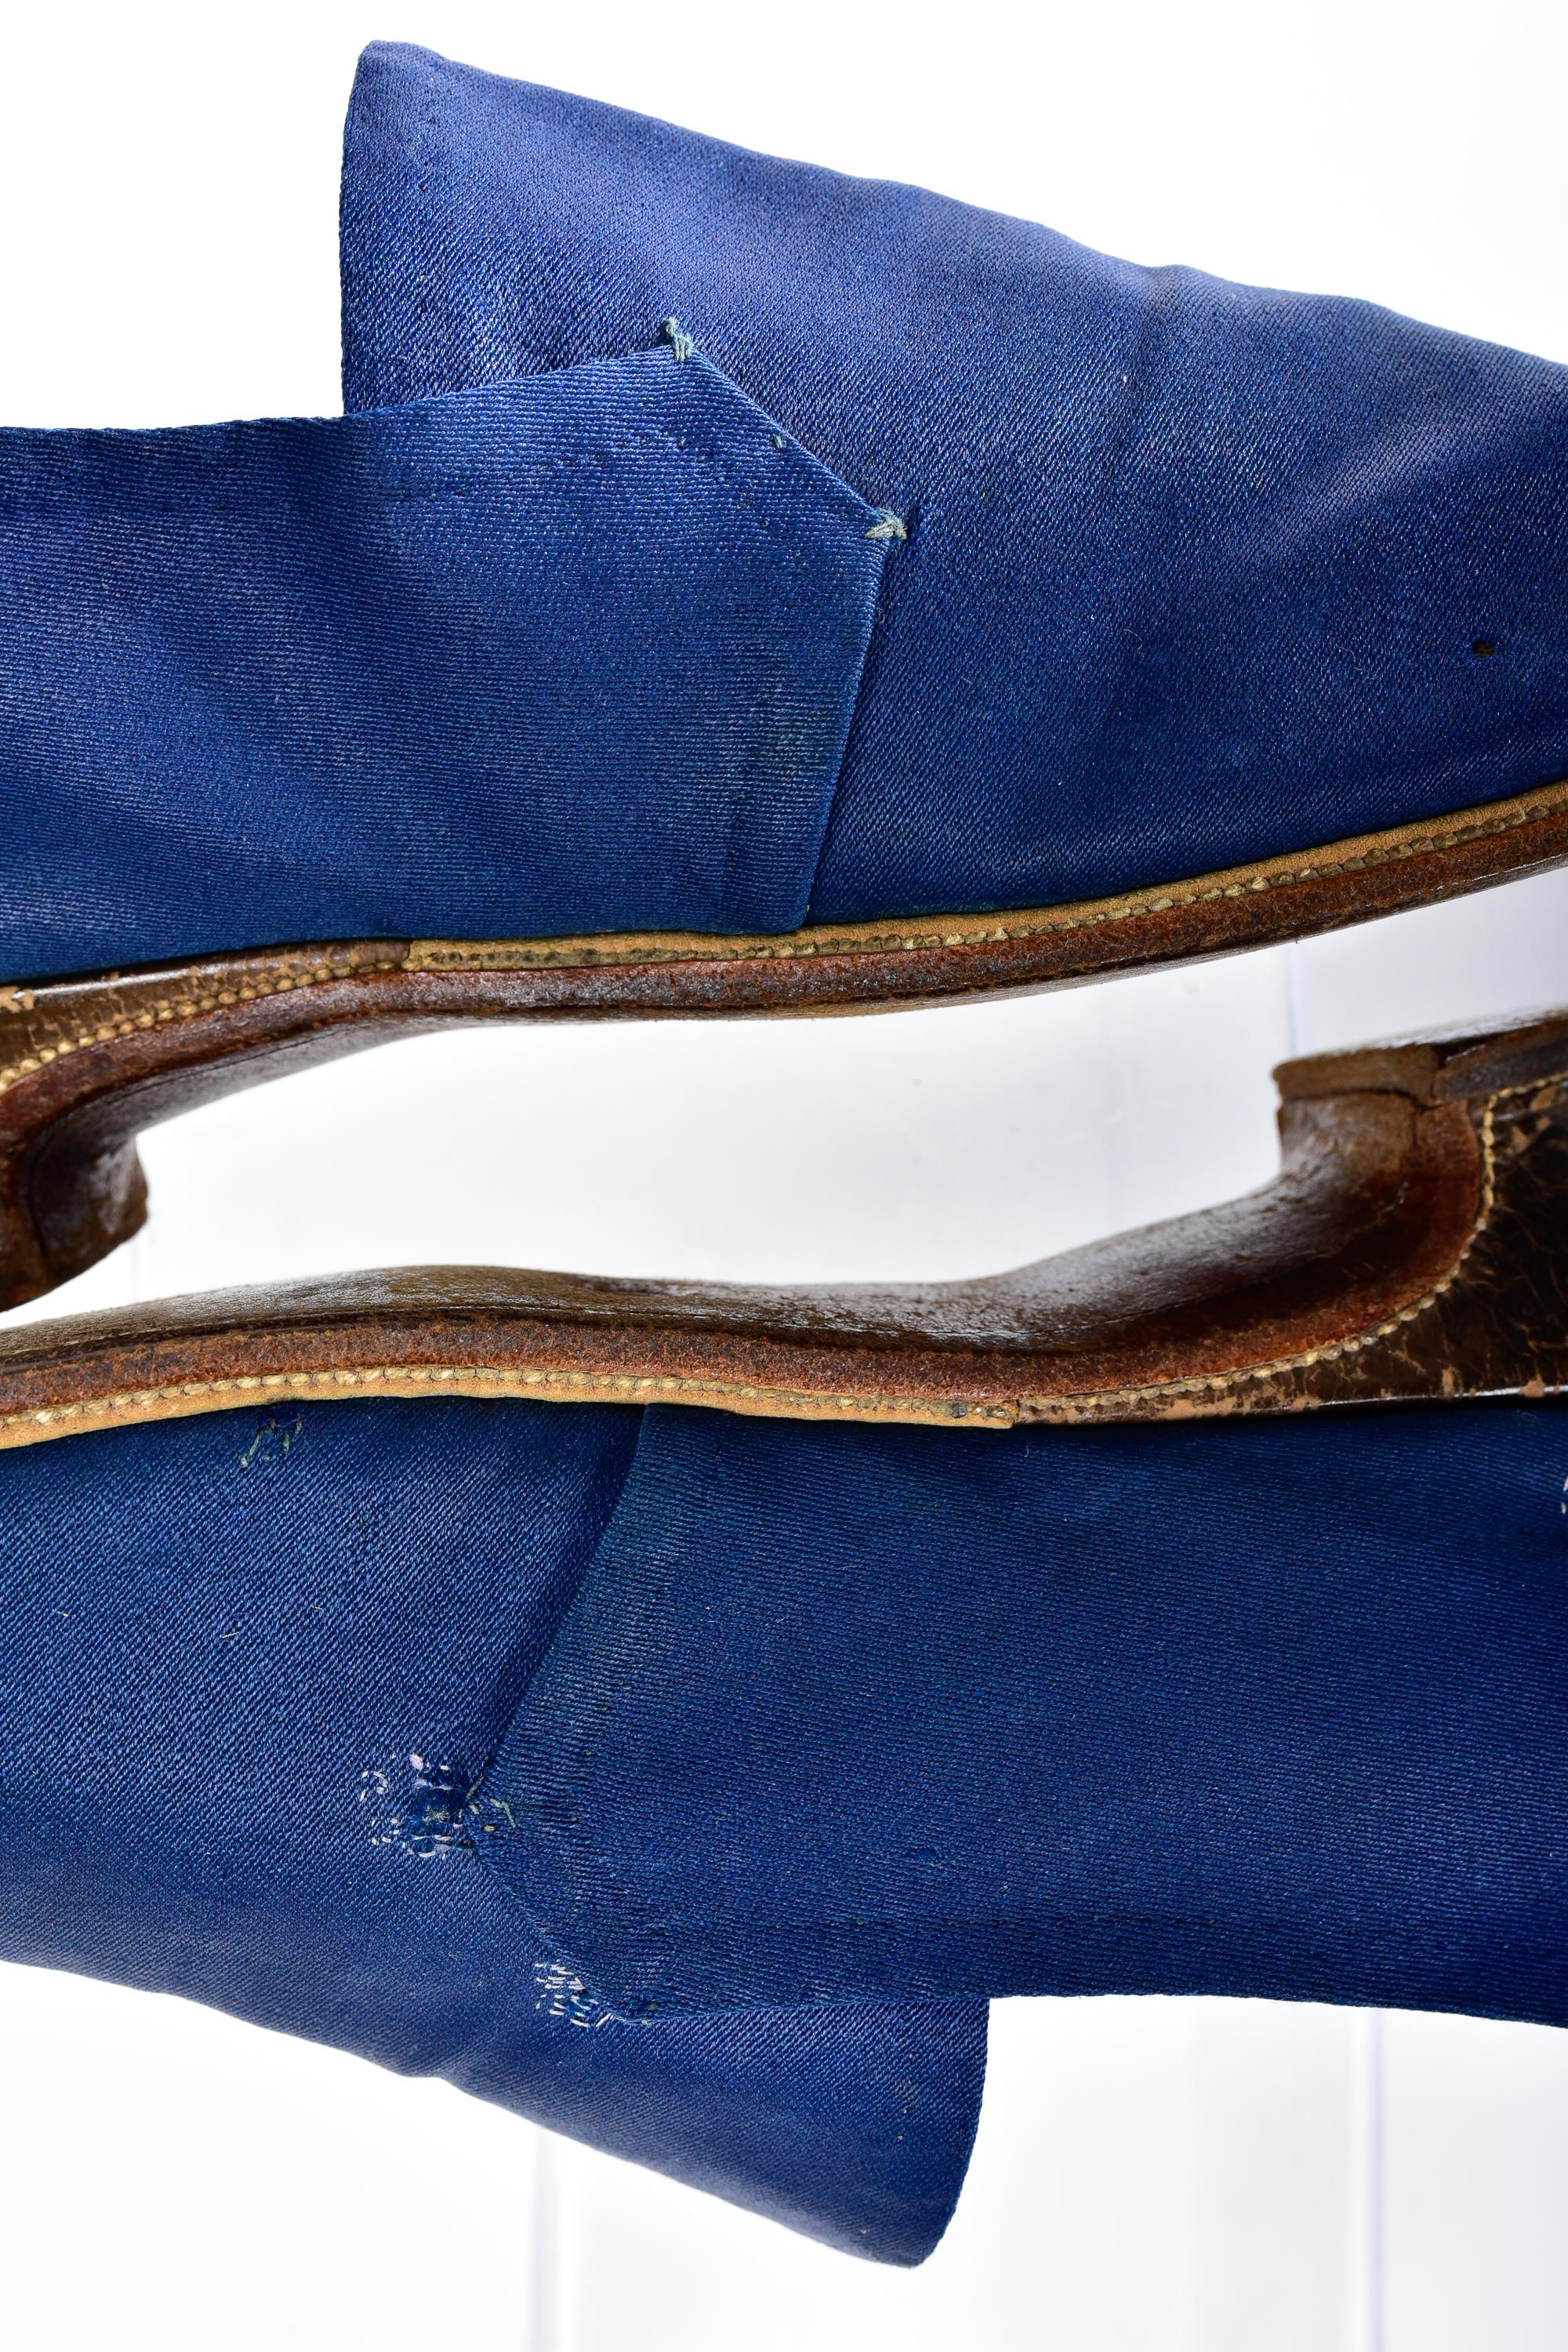 Antique Pair of shoes in glazed wool twill Bleu de France - Louis XVI Circa 1780 For Sale 5